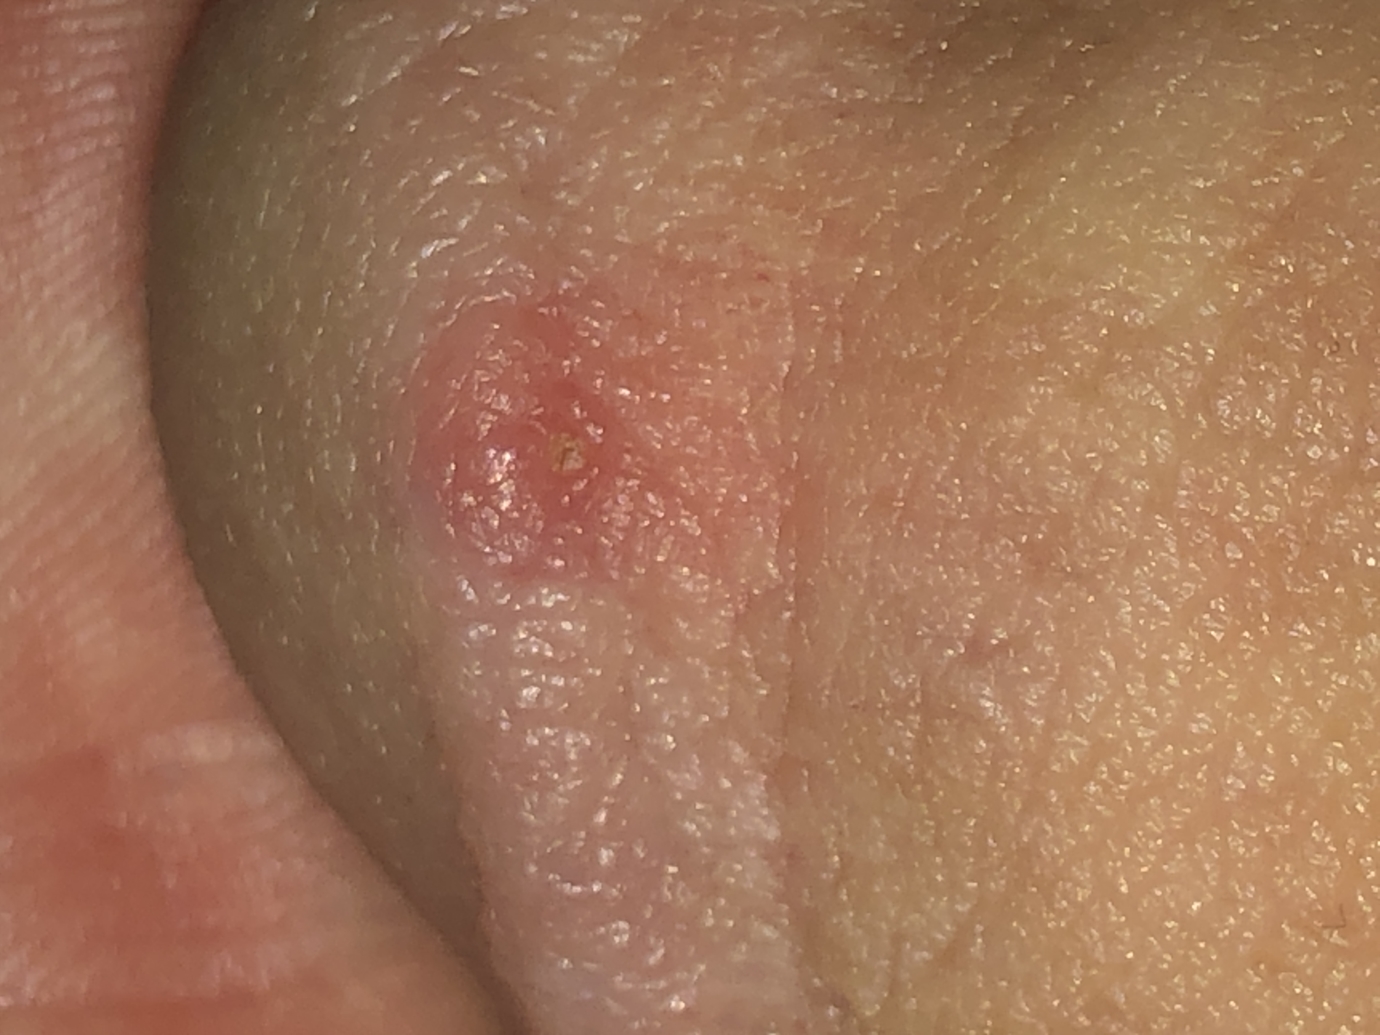 Red bump on penis head, worried it could be a STD.